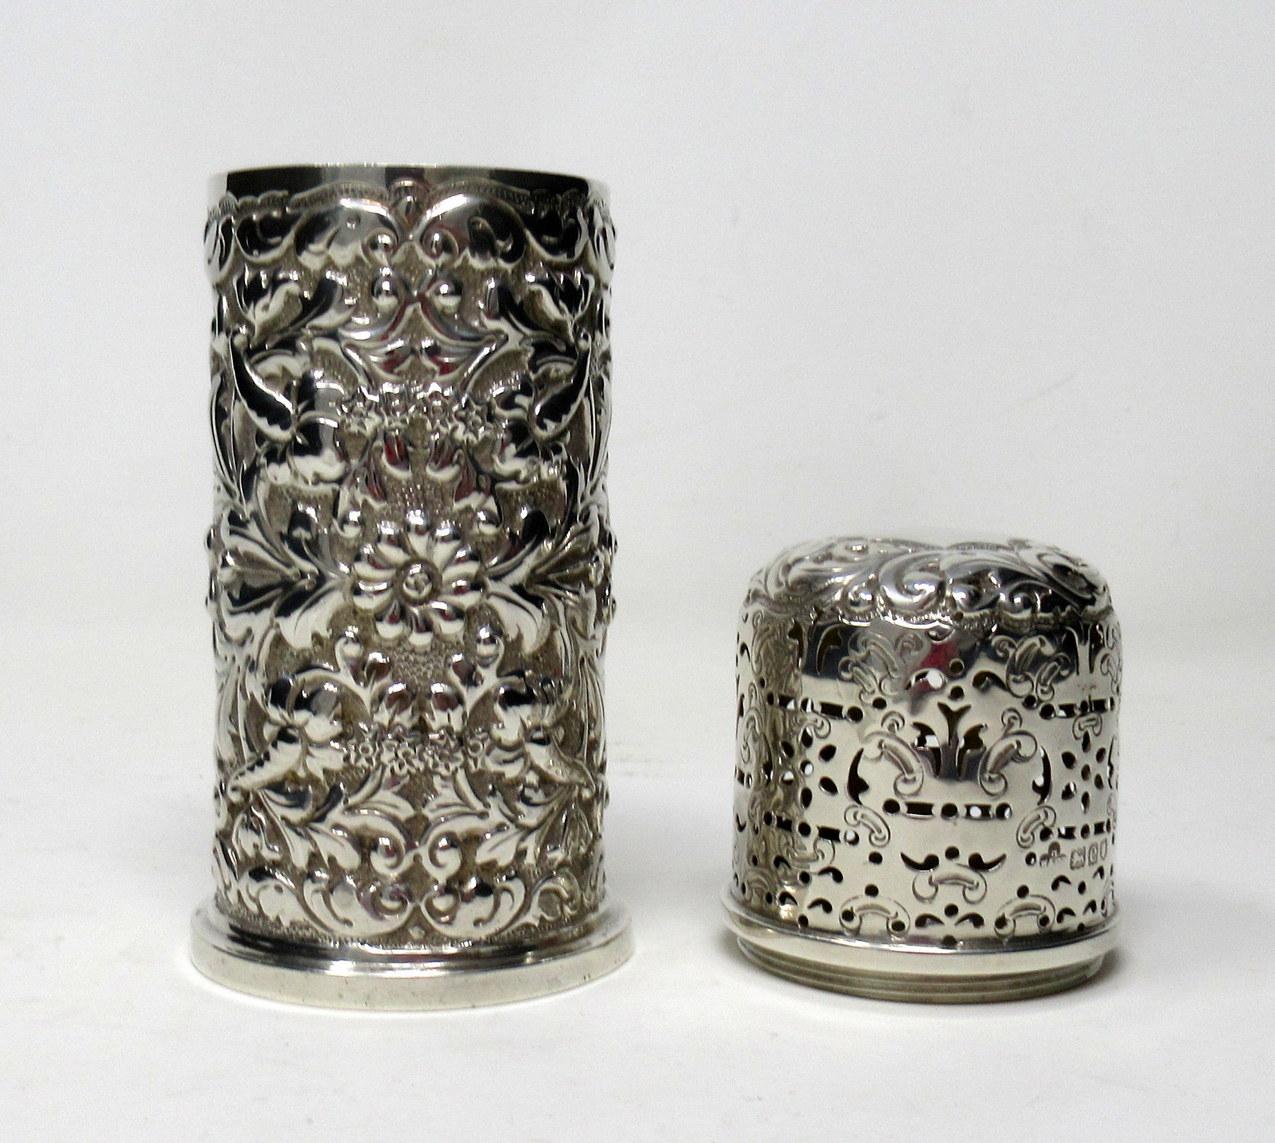 Stunning English sterling silver two-part table sugar caster muffineer of cylindrical form ending on a circular spreading base.

The entire embossed with flowers leaves and scrolls, with elements of Art Nouveau decoration. The original firm fitting